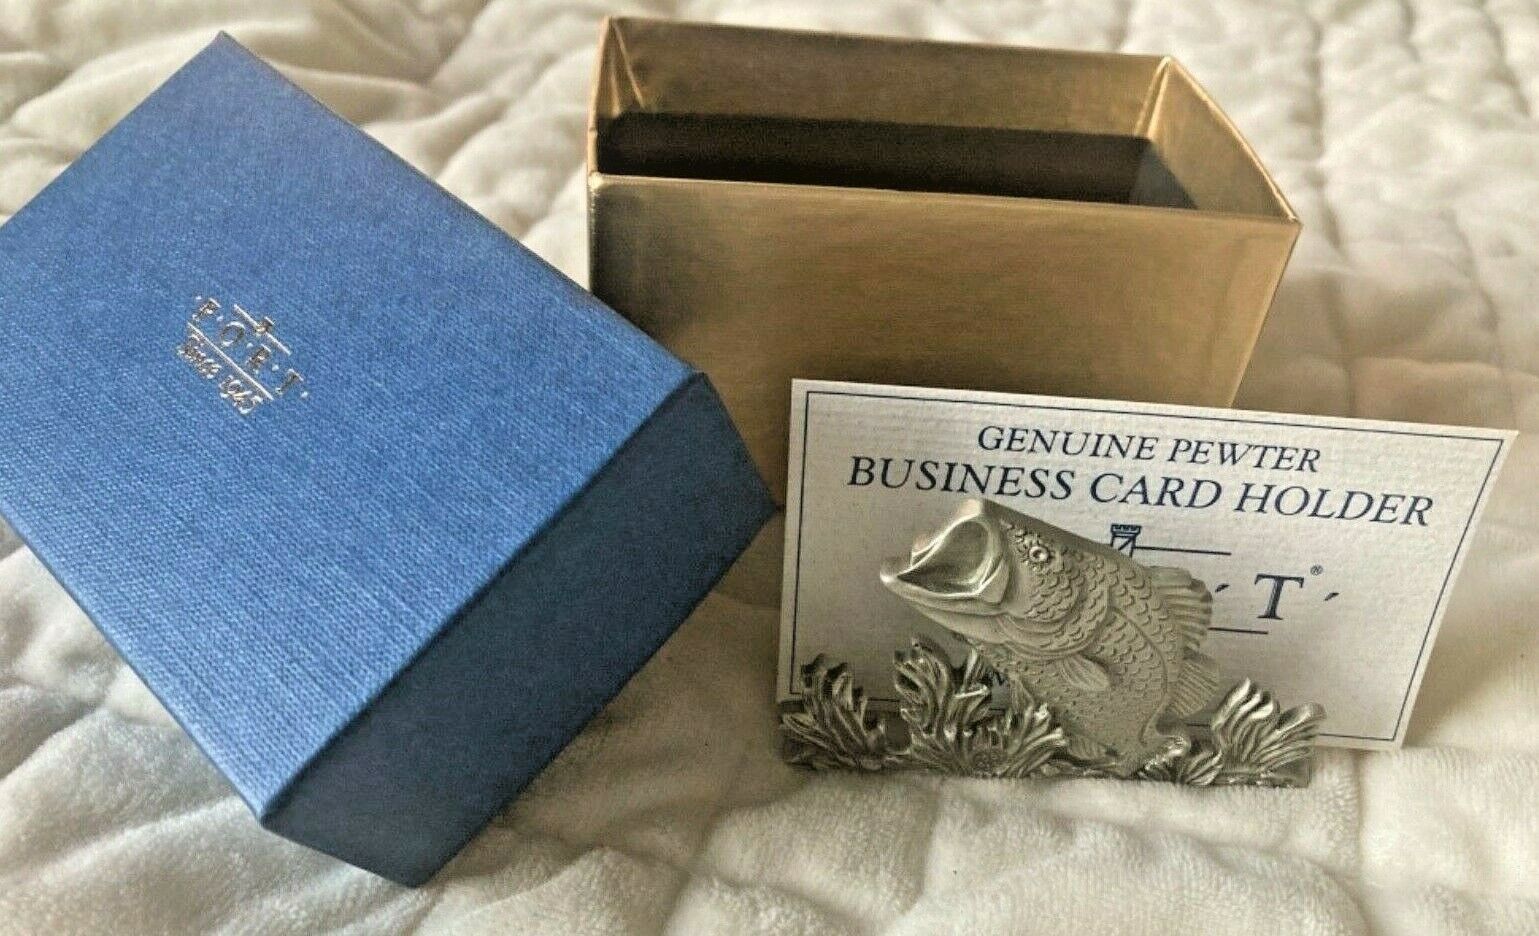 LARGE MOUTH BASS Fish PEWTER BUSINESS CARD HOLDER by Fort USA NIB NOS